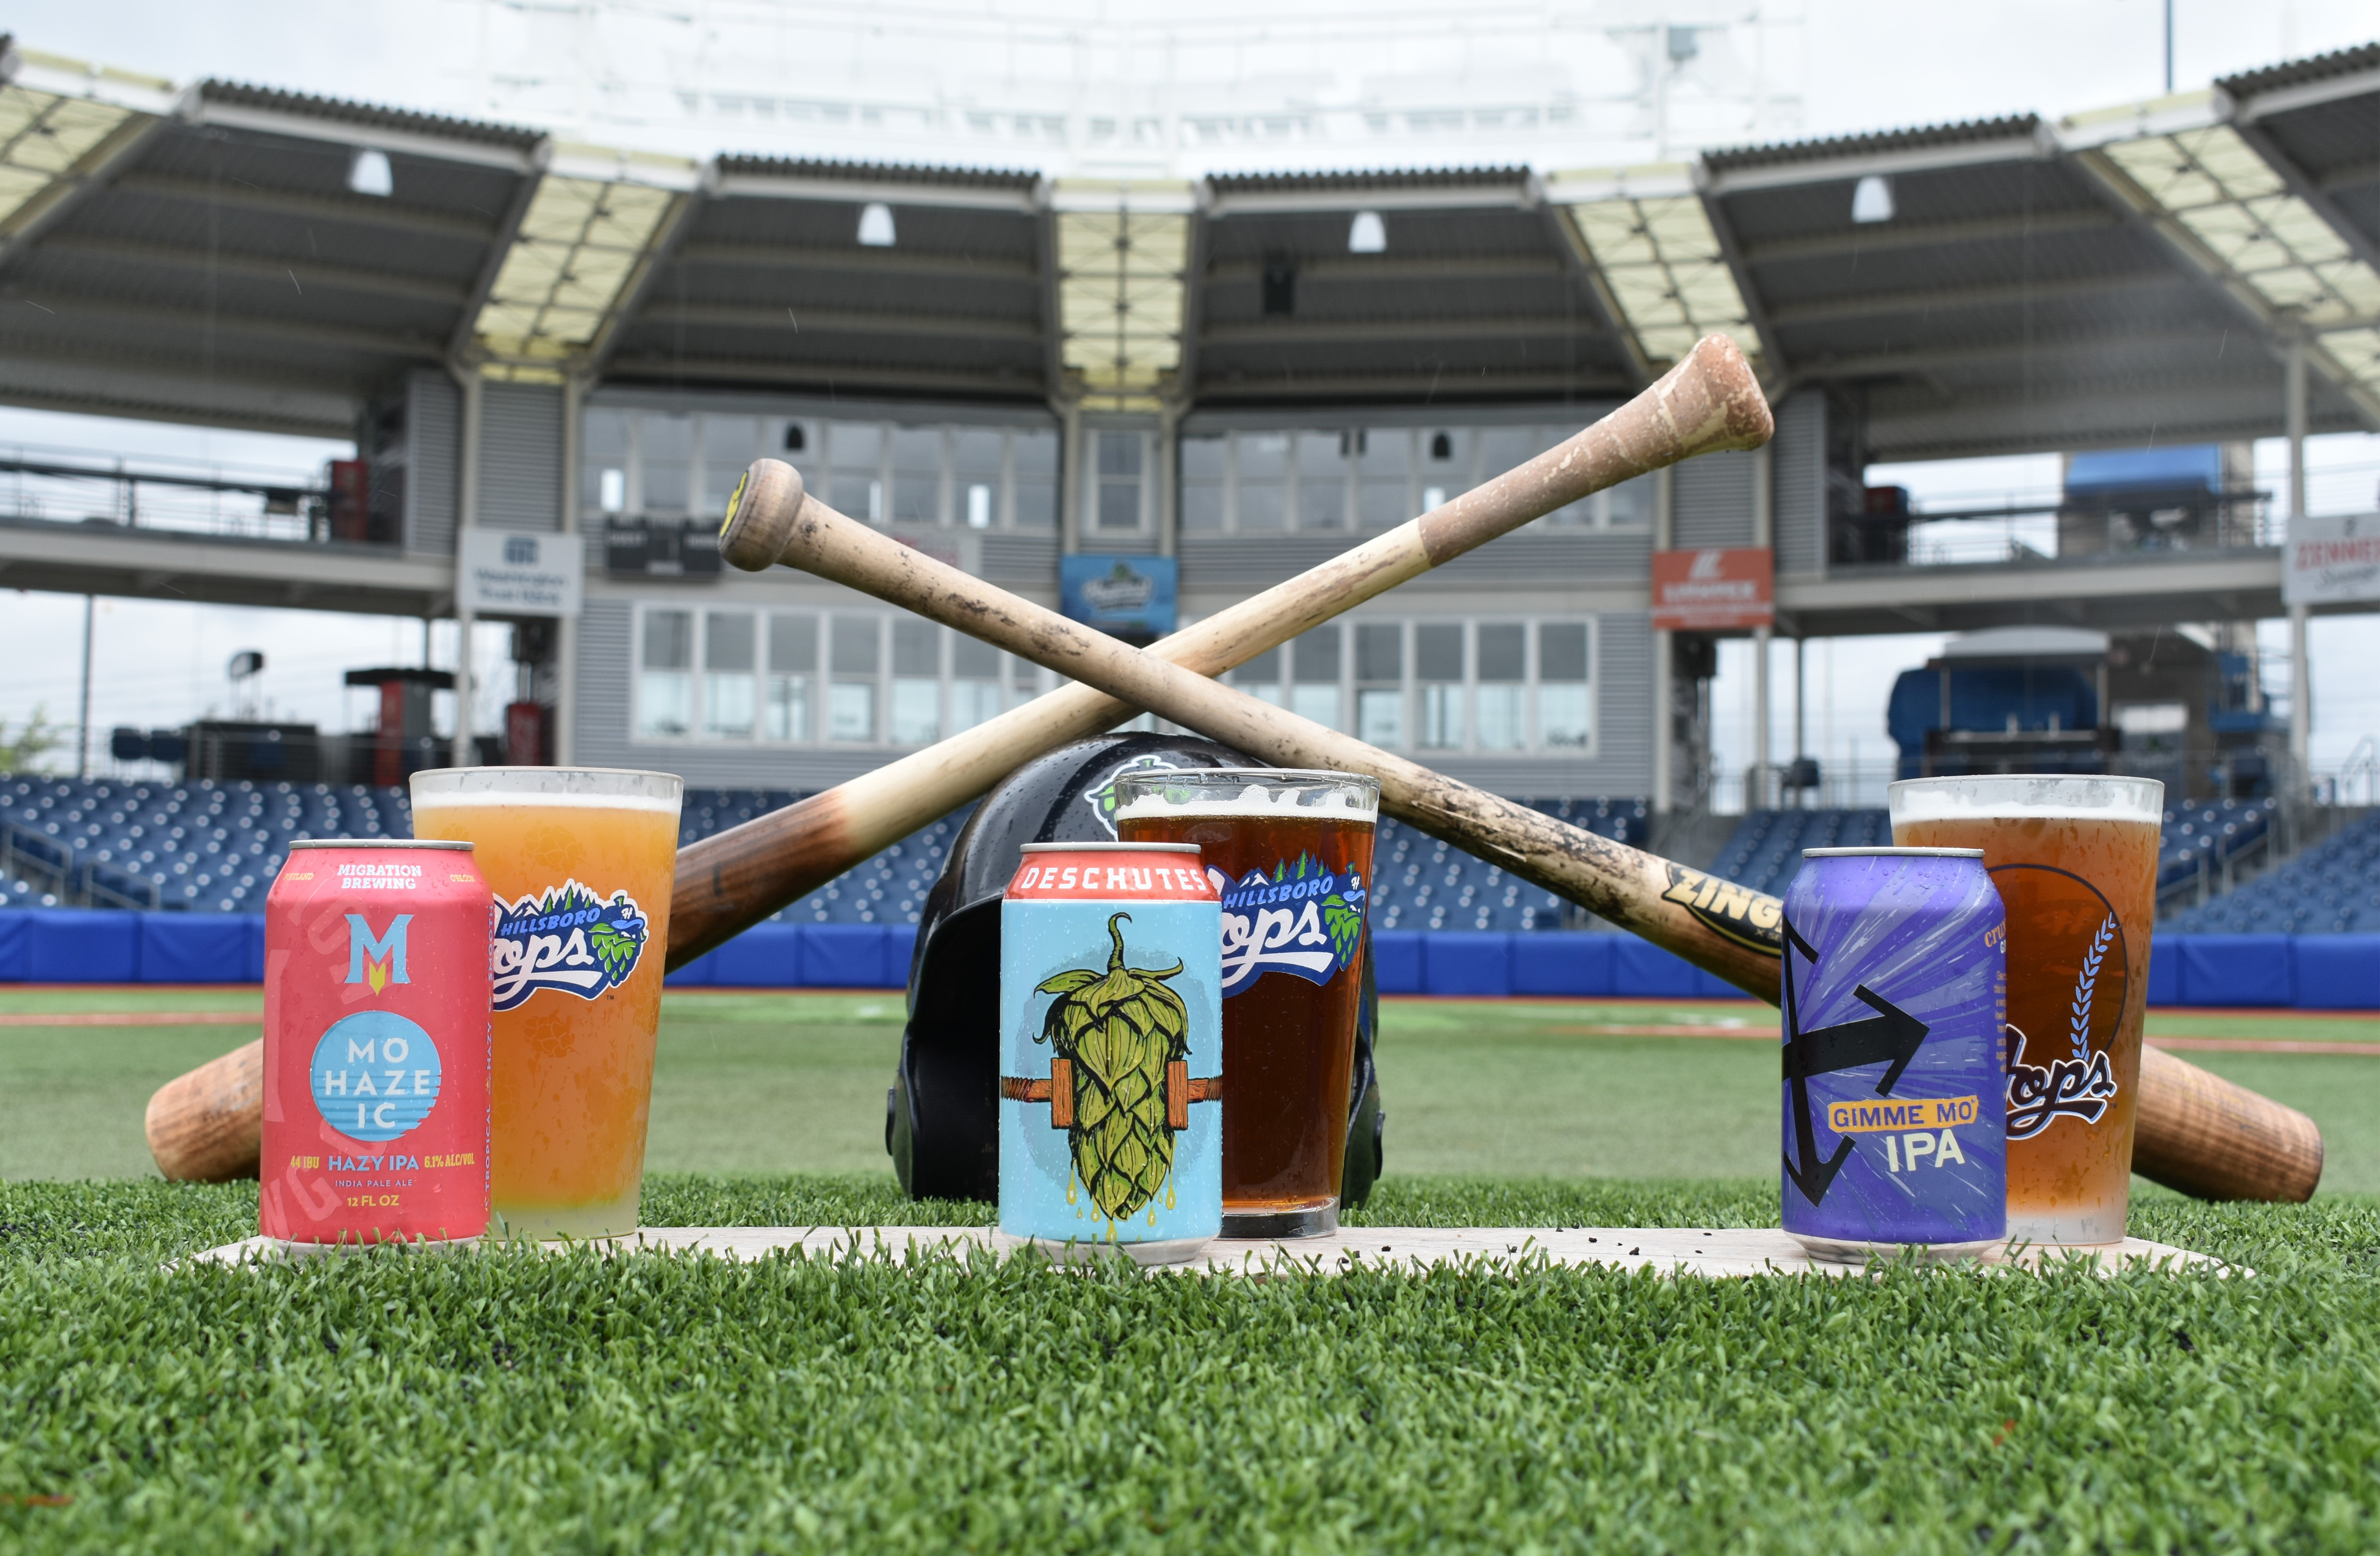 Deschutes Brewery, Migration Brewing and Crux Fermentation Project Become Official Beer Partners of the Hillsboro Hops. (image courtesy of the Hillsboro Hops)